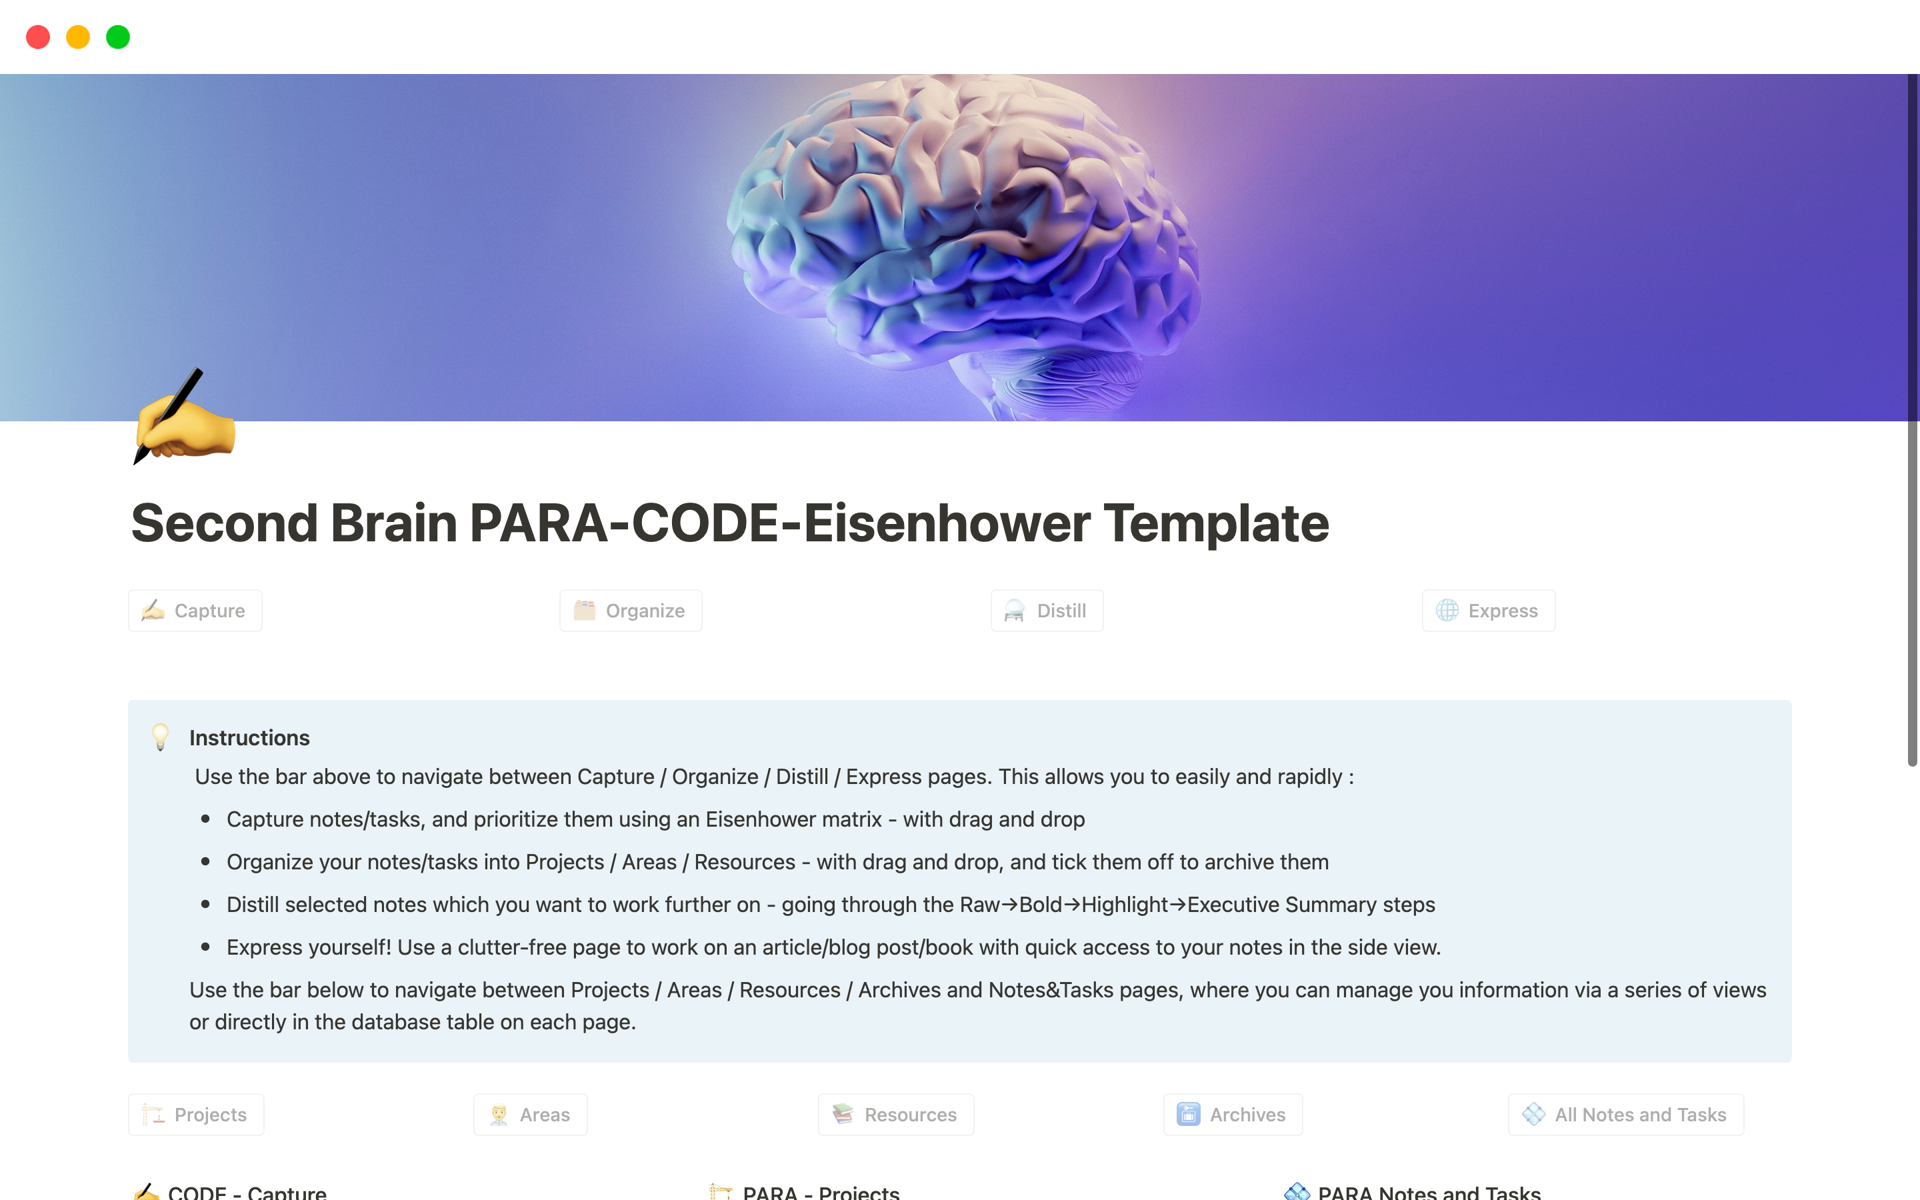 Complete Second Brain / PKM setup that allows you to create and manage your notes/tasks in Notion using PARA, CODE and Eisenhower matrix techniques.